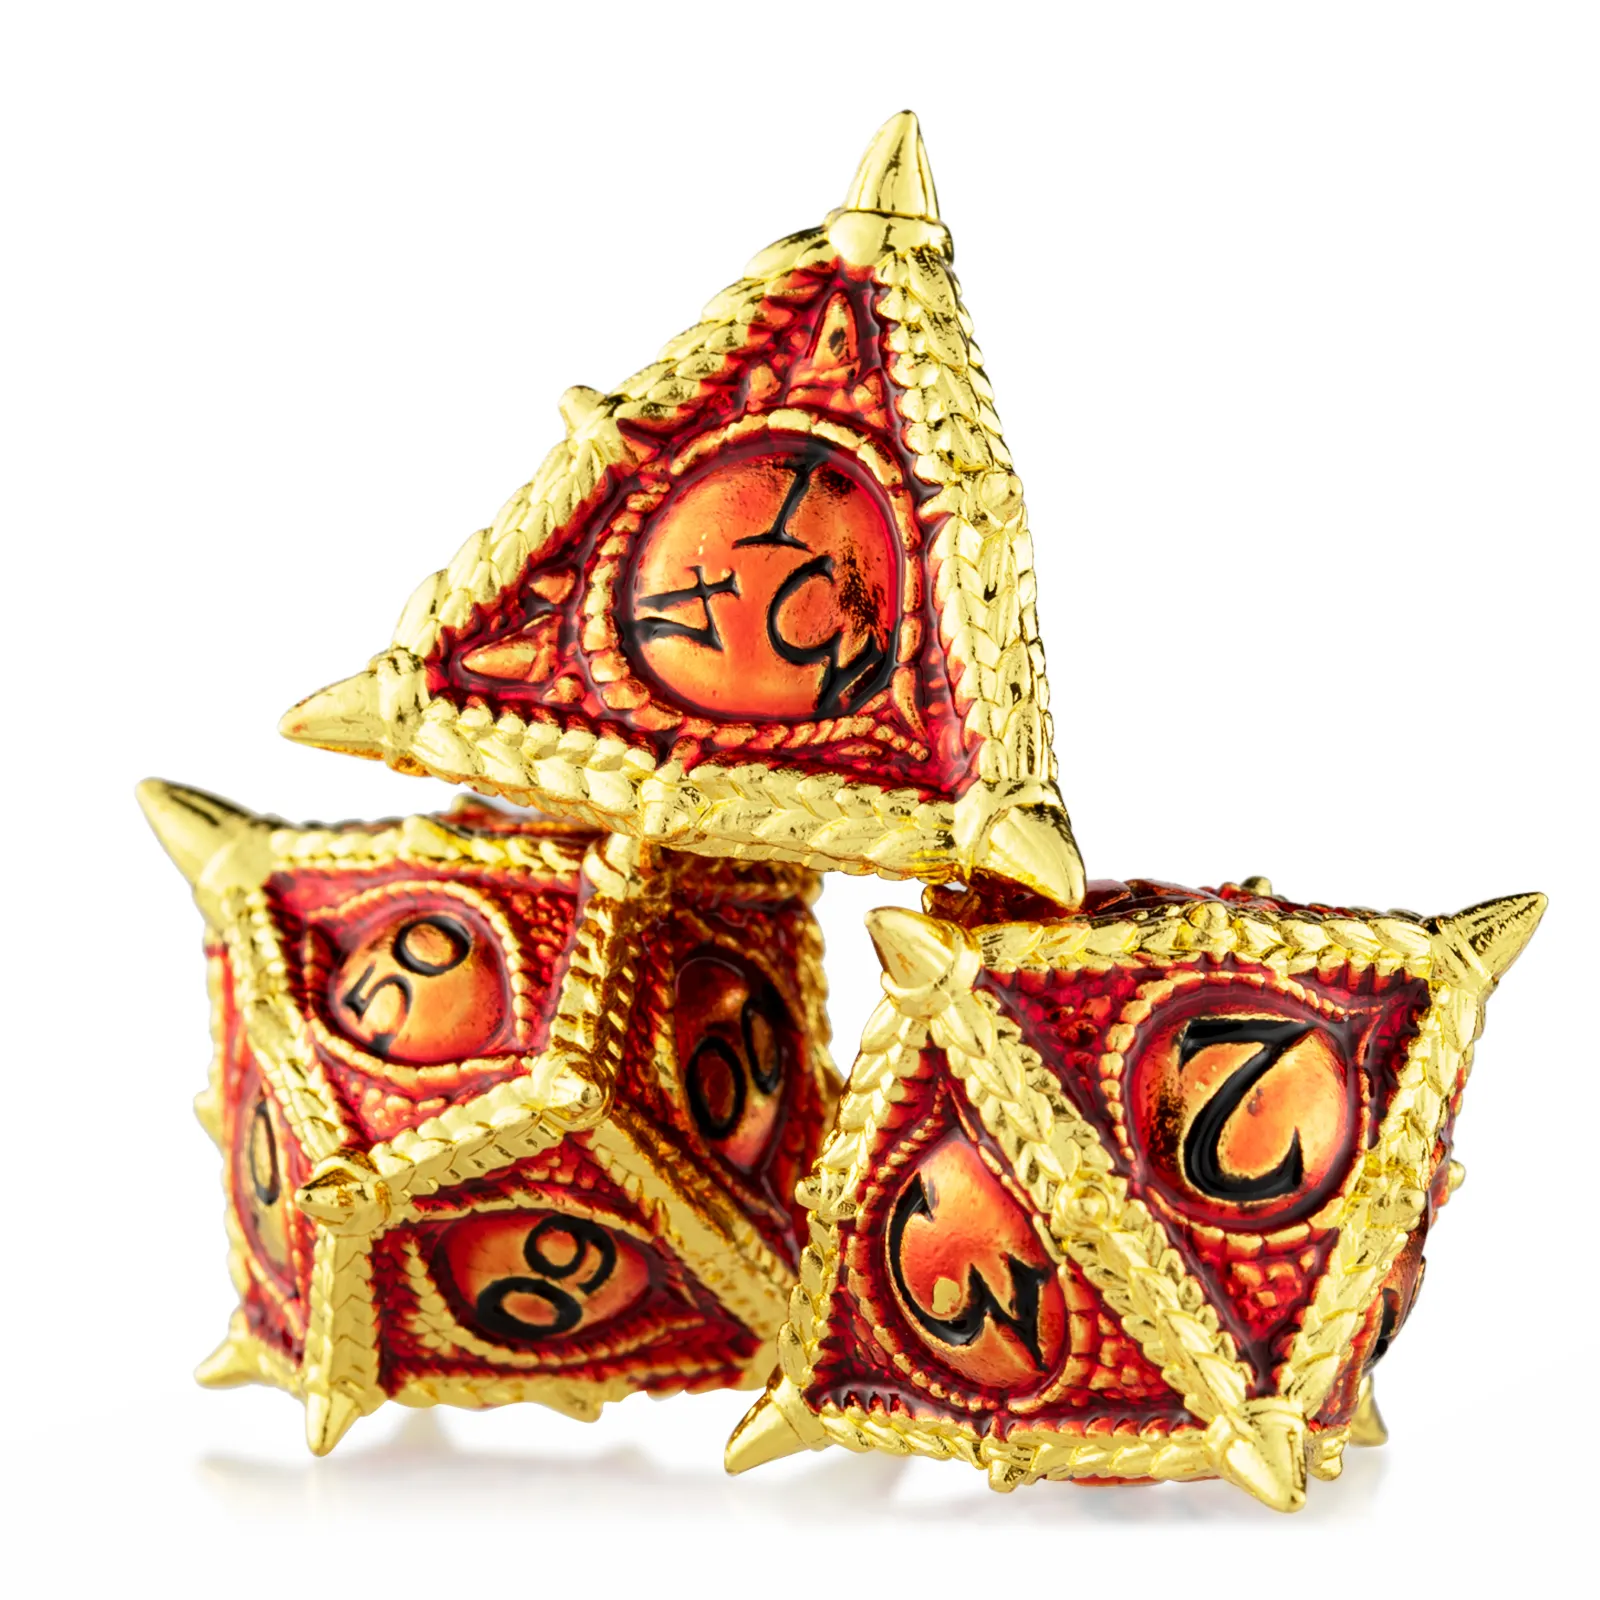 Factory Customized Wholesale New product hot sale dnd dice set Dragon's Eye polyhedral metal dice set for D D RPG game dnd dice